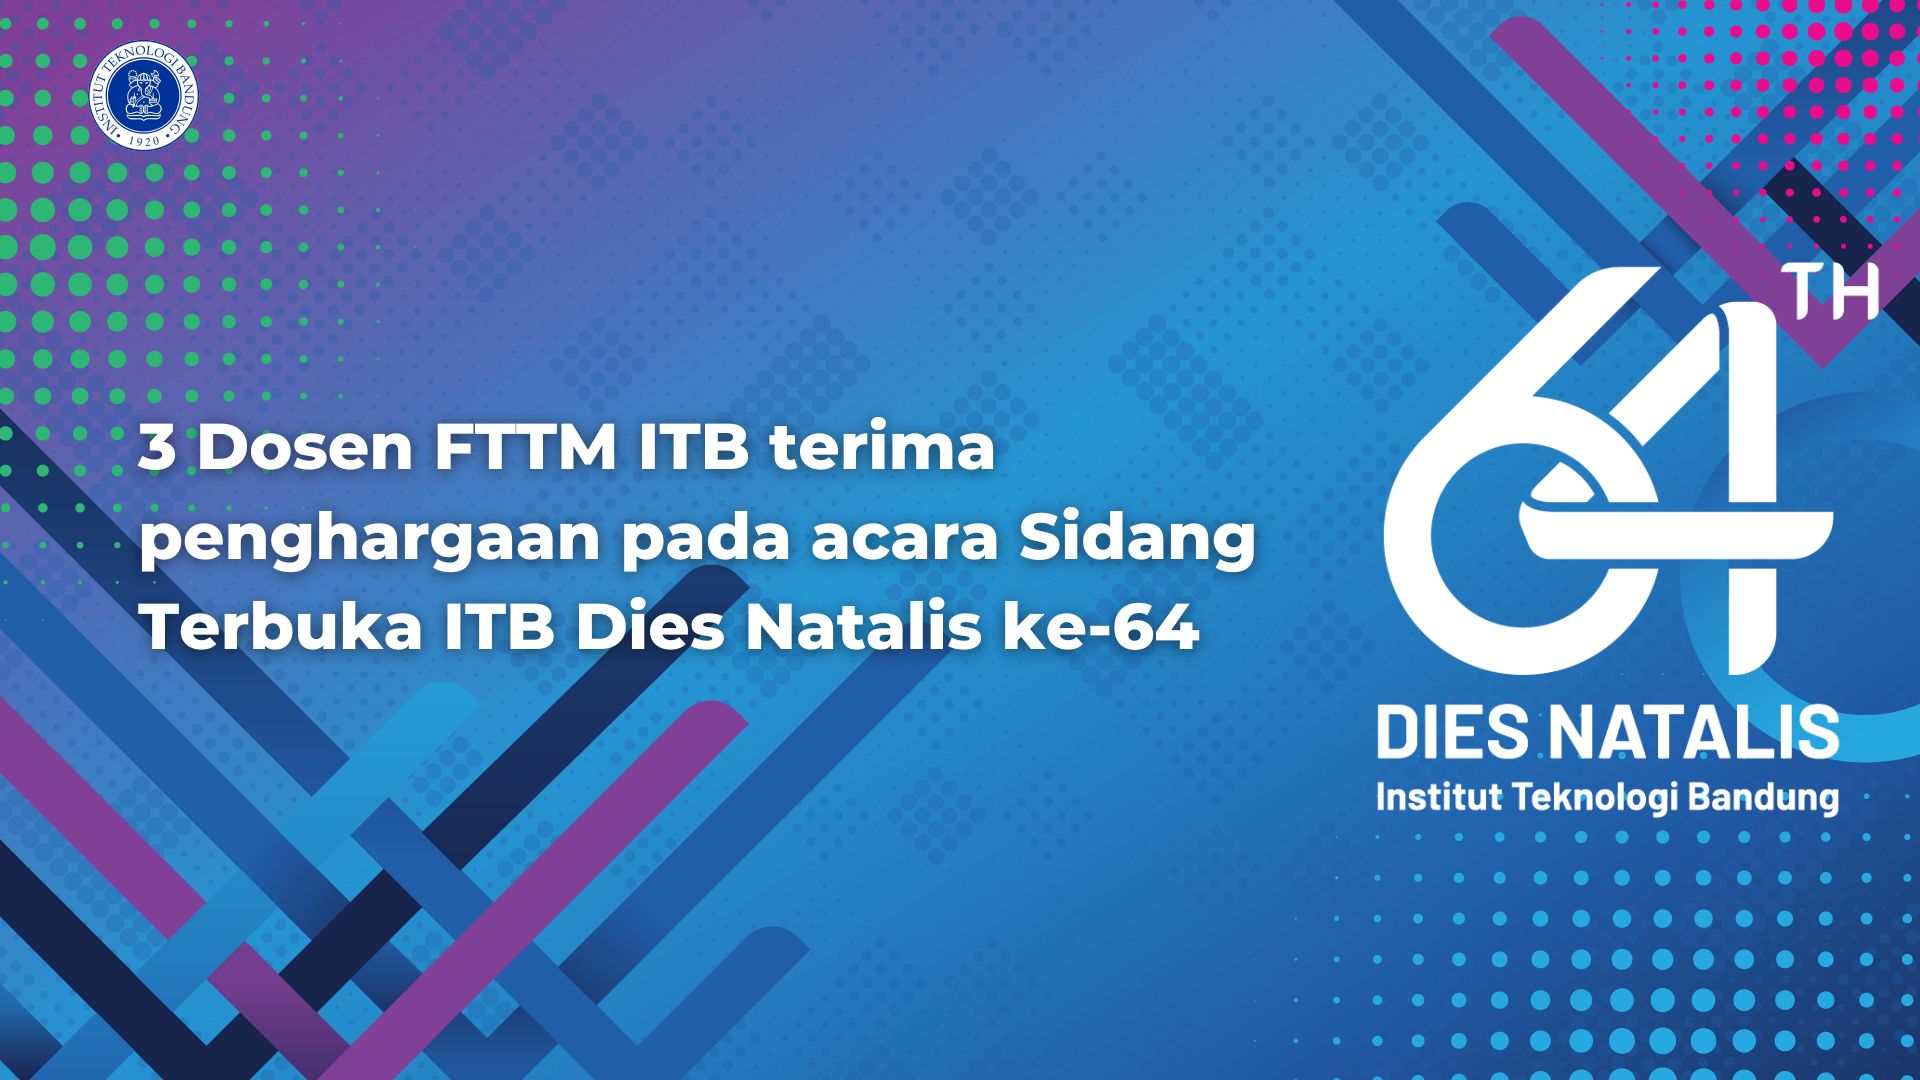 3 FTTM ITB lecturers received awards at the 64th Anniversary ITB